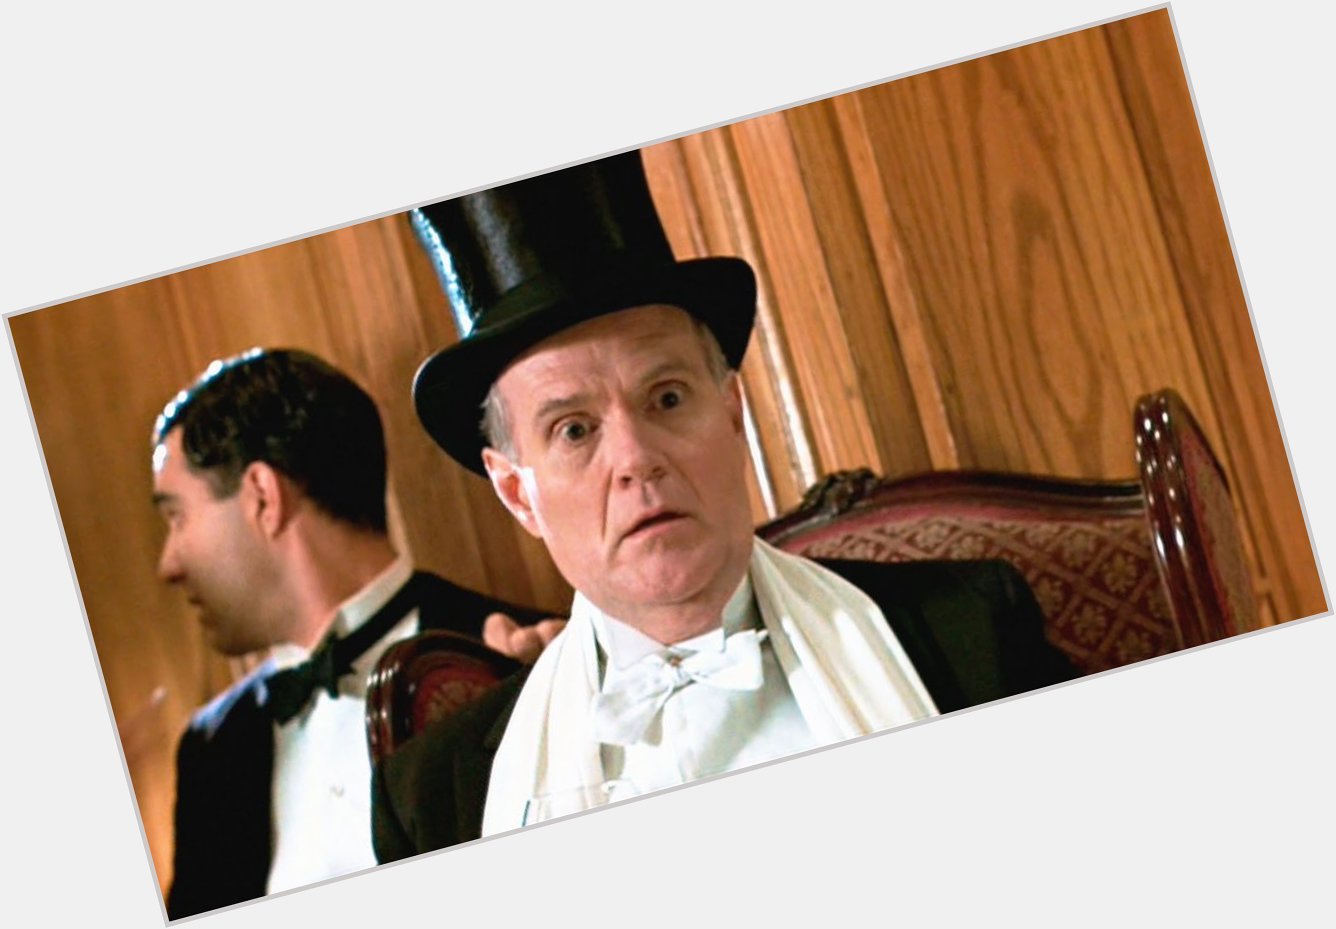 Happy Birthday to Michael Ensign, here in TITANIC! 